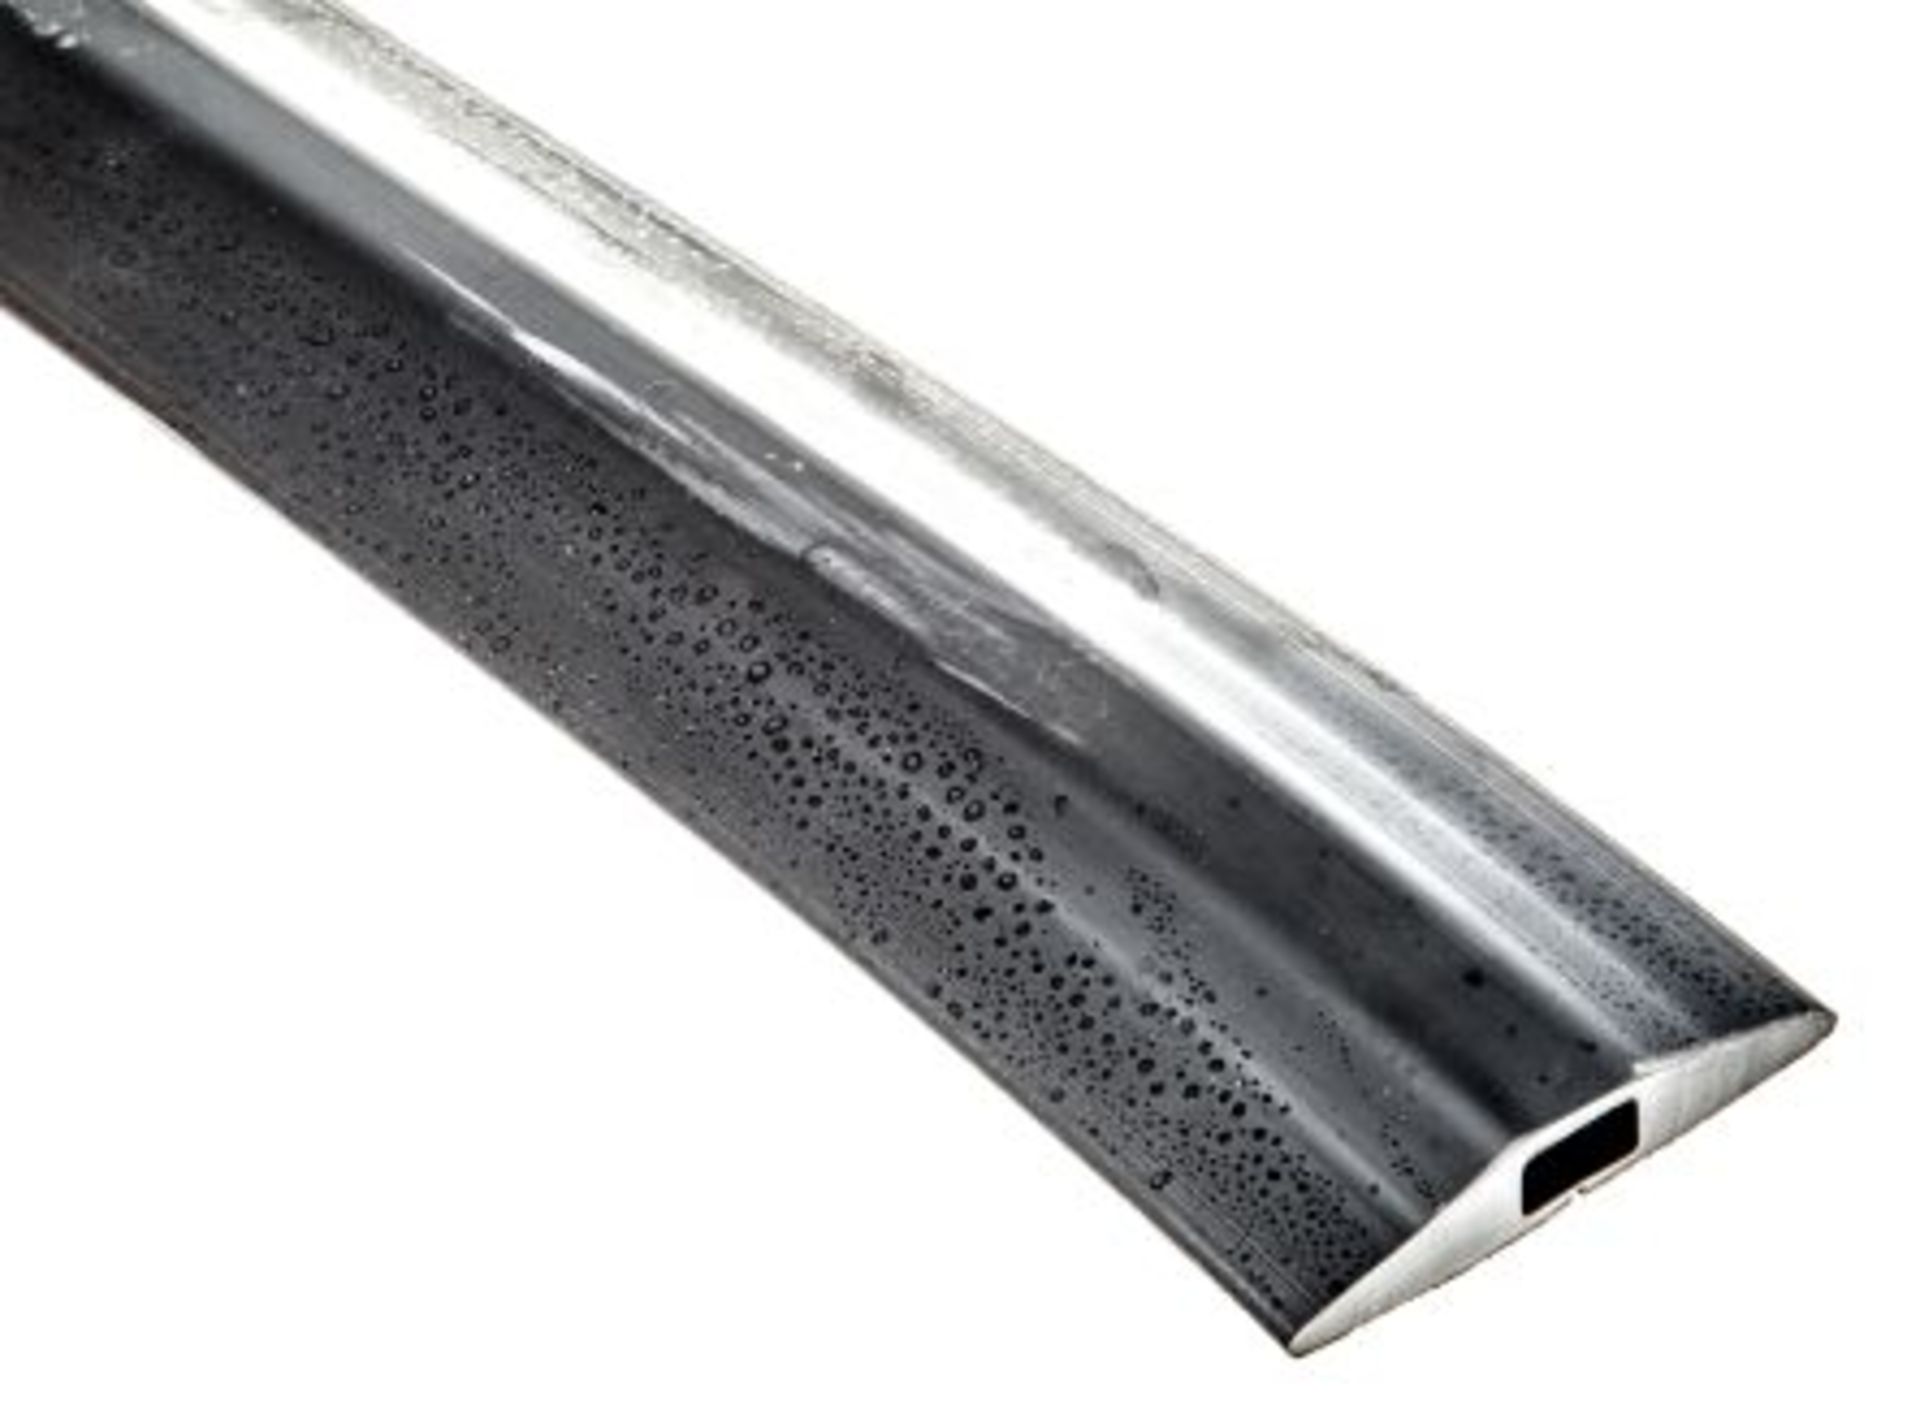 V Brand New 3m Roll Vulcascot 14 x 8m Cable Cover ISP £33.11 (RS Components UK) X 2 YOUR BID PRICE